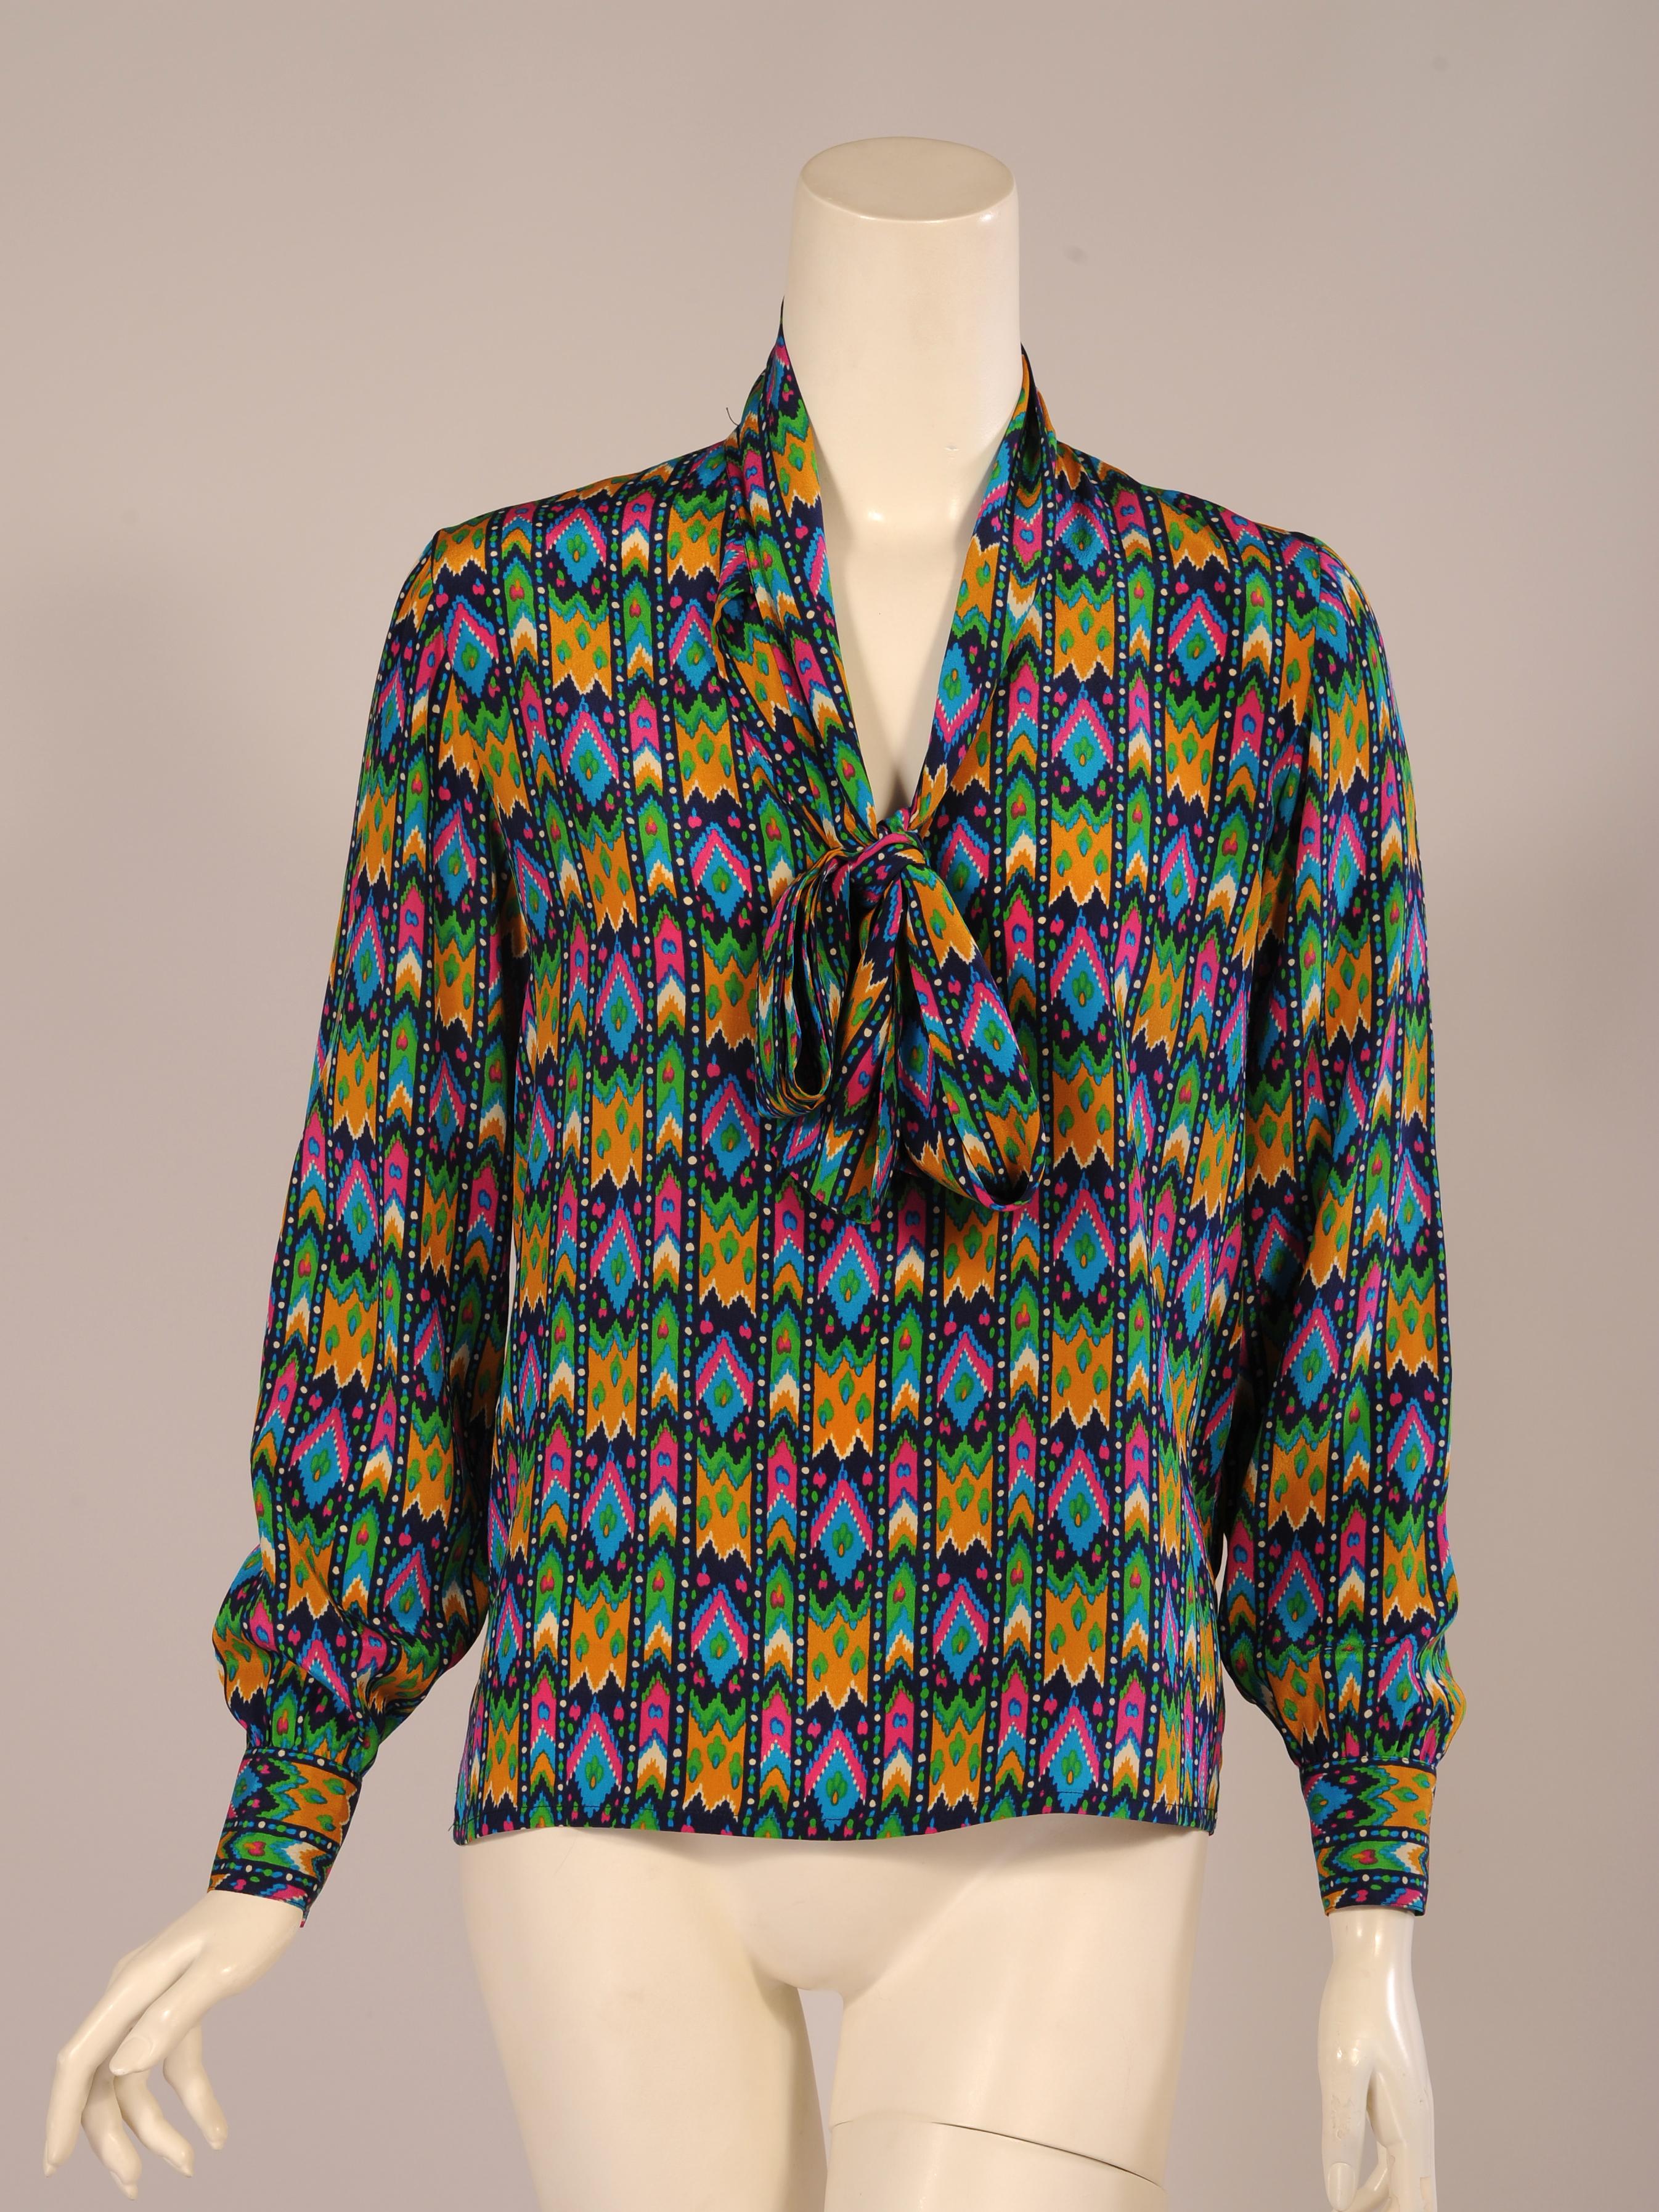 This fabulous silk print blouse from the YSL Rive Gauche line just slips on over your head. The collar becomes a tie or pussy cat bow. The long sleeves have button cuffs. The simplicity of the blouse design allows the pattern of the silk to be the